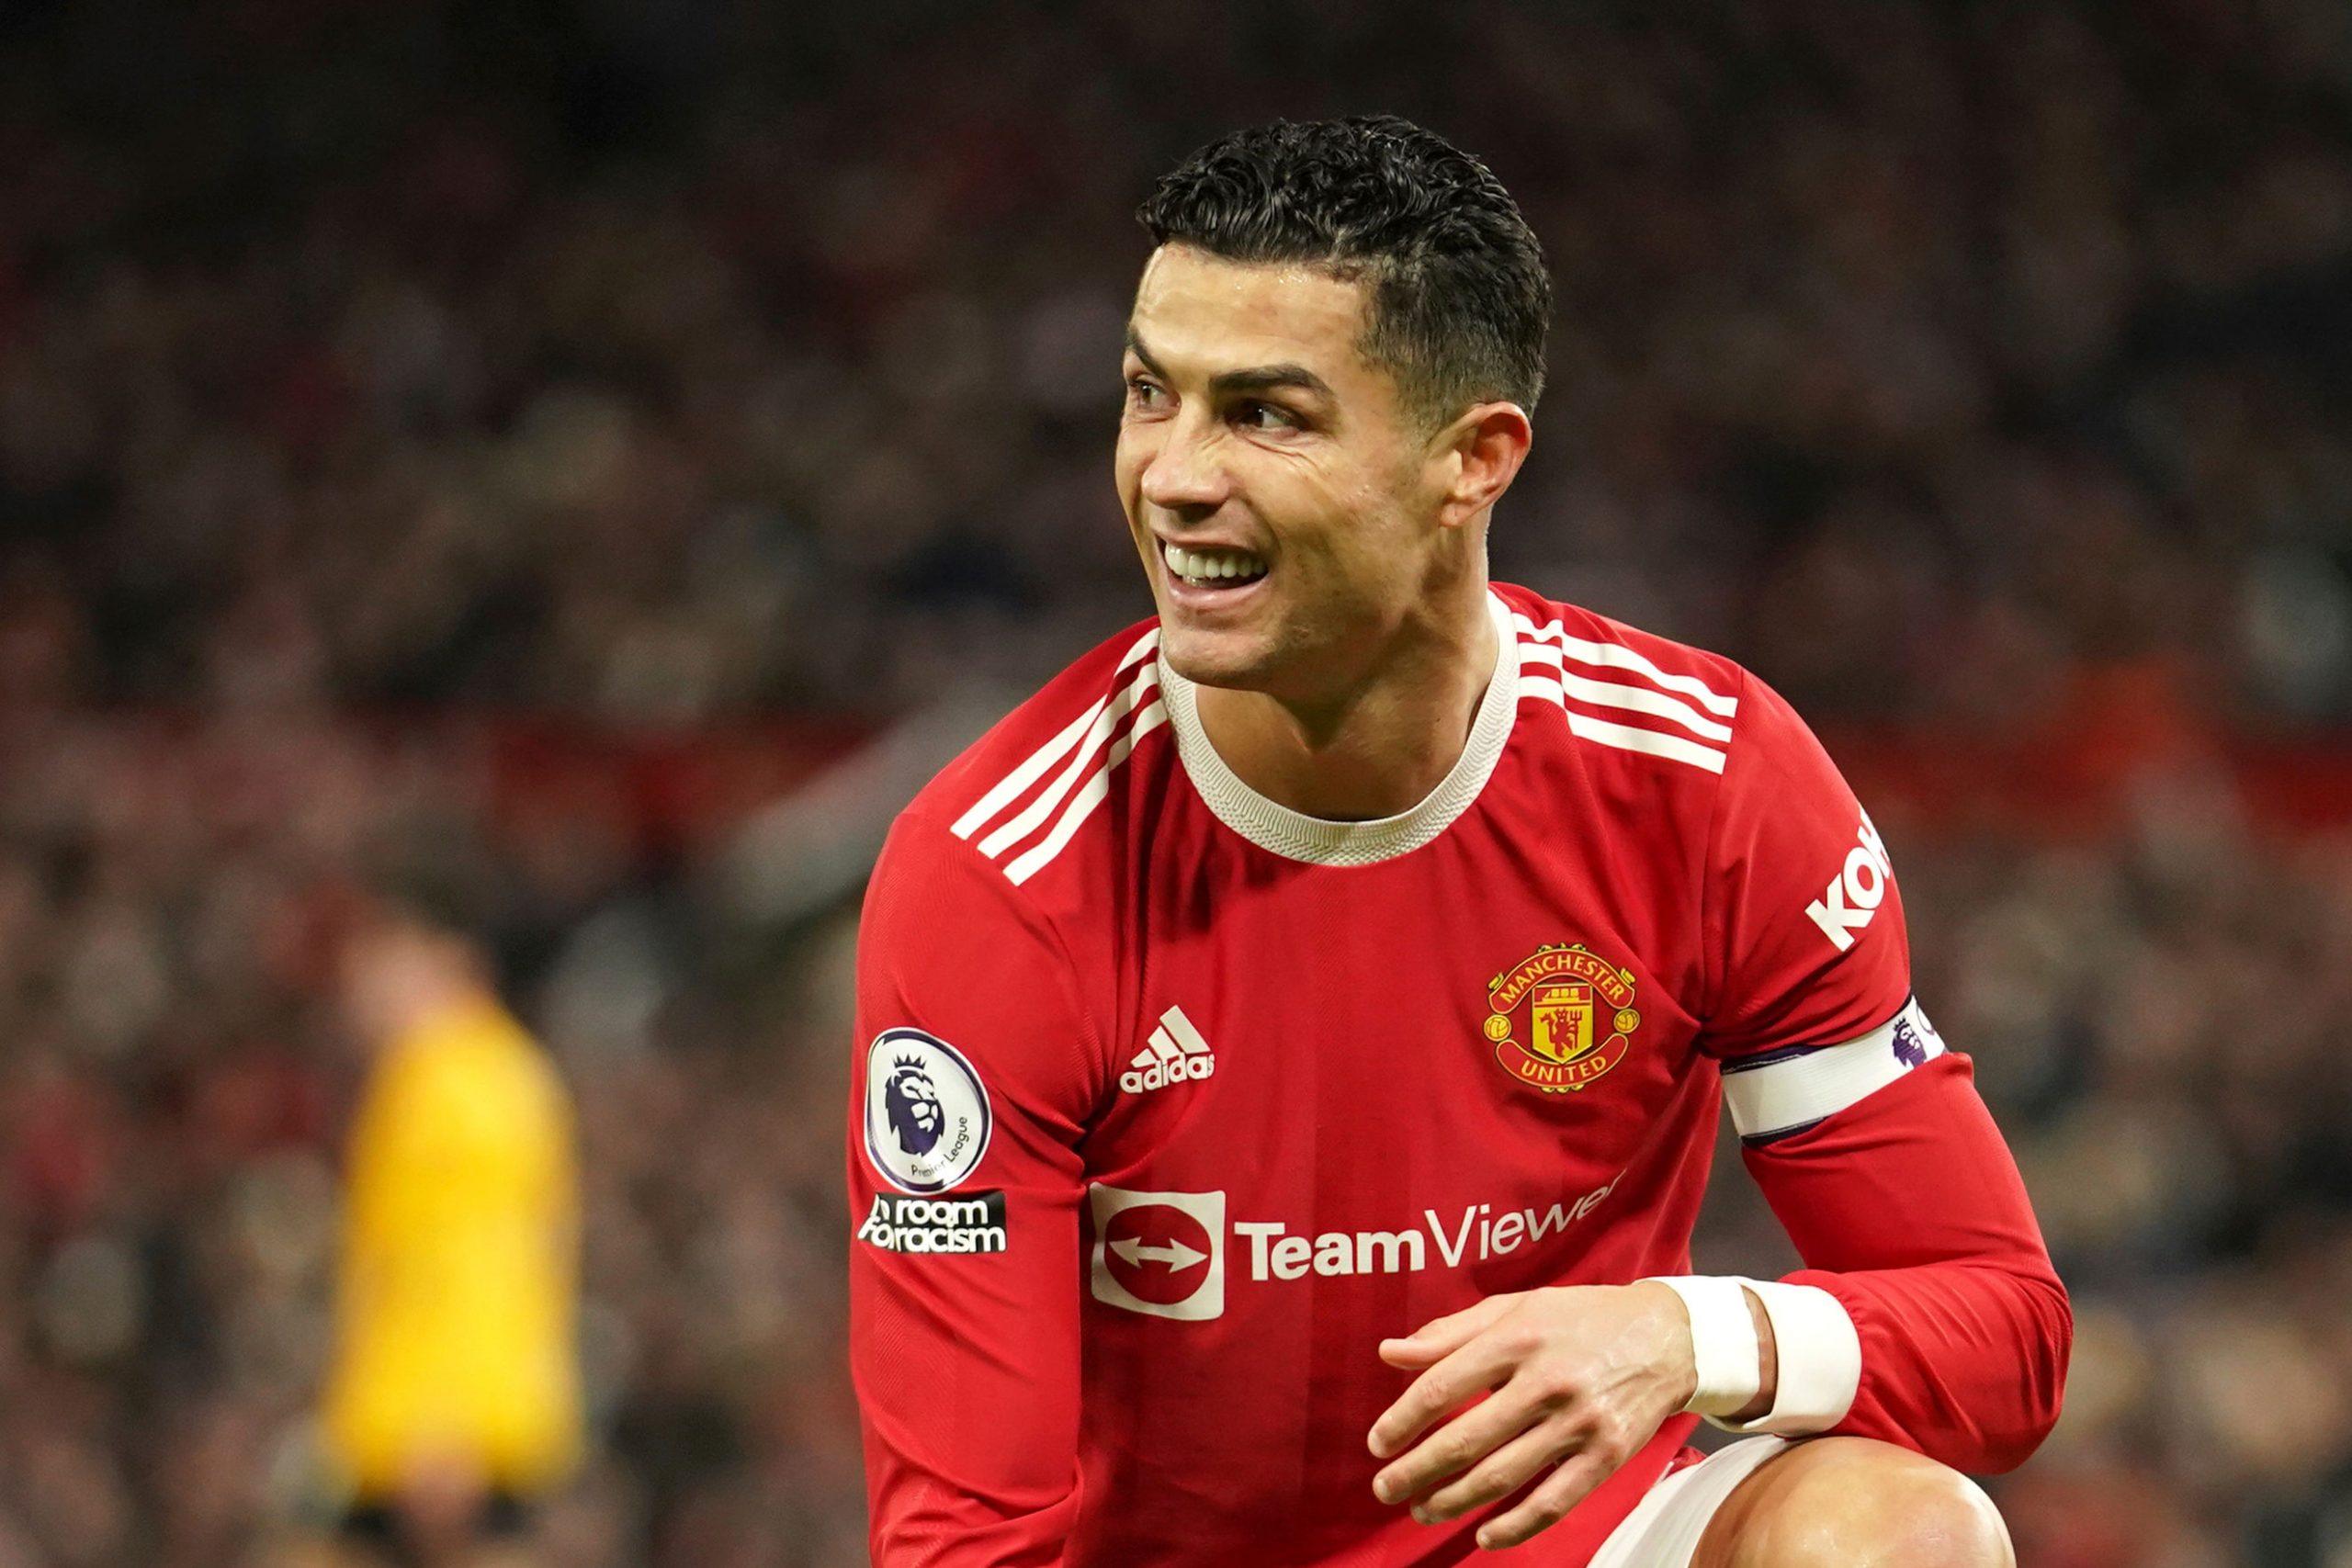 Here to win: Cristiano Ronaldo urges Man United to achieve big things